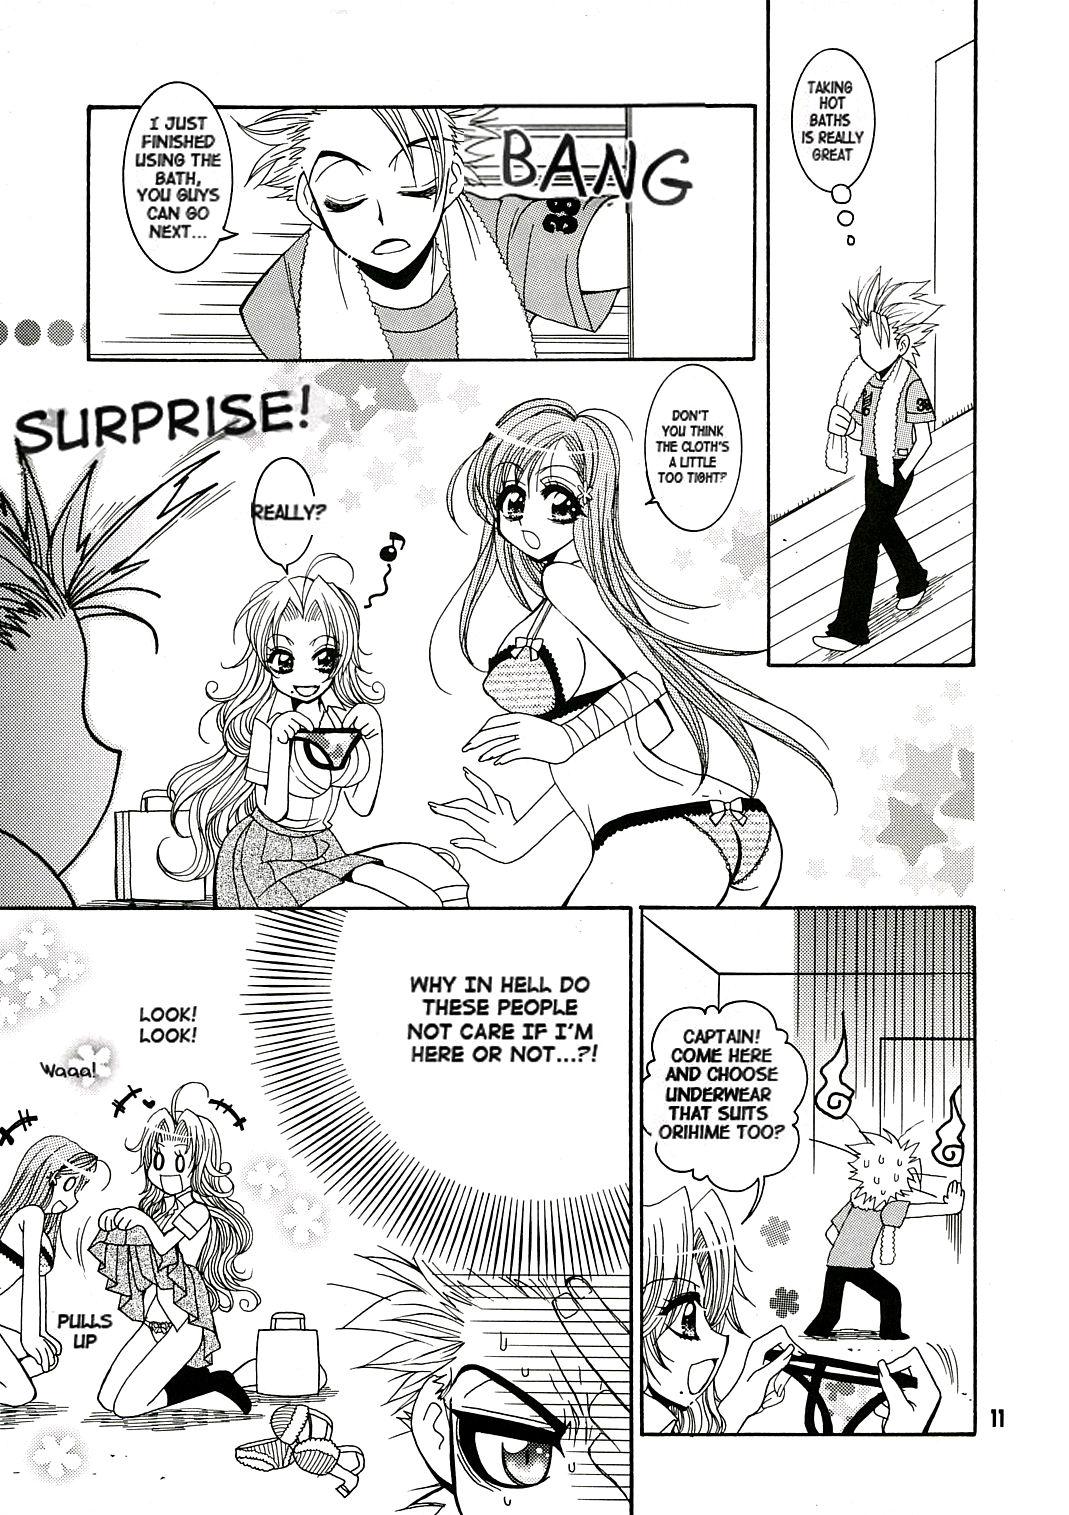 Chastity BABY BLUE! - Bleach Black - Page 10